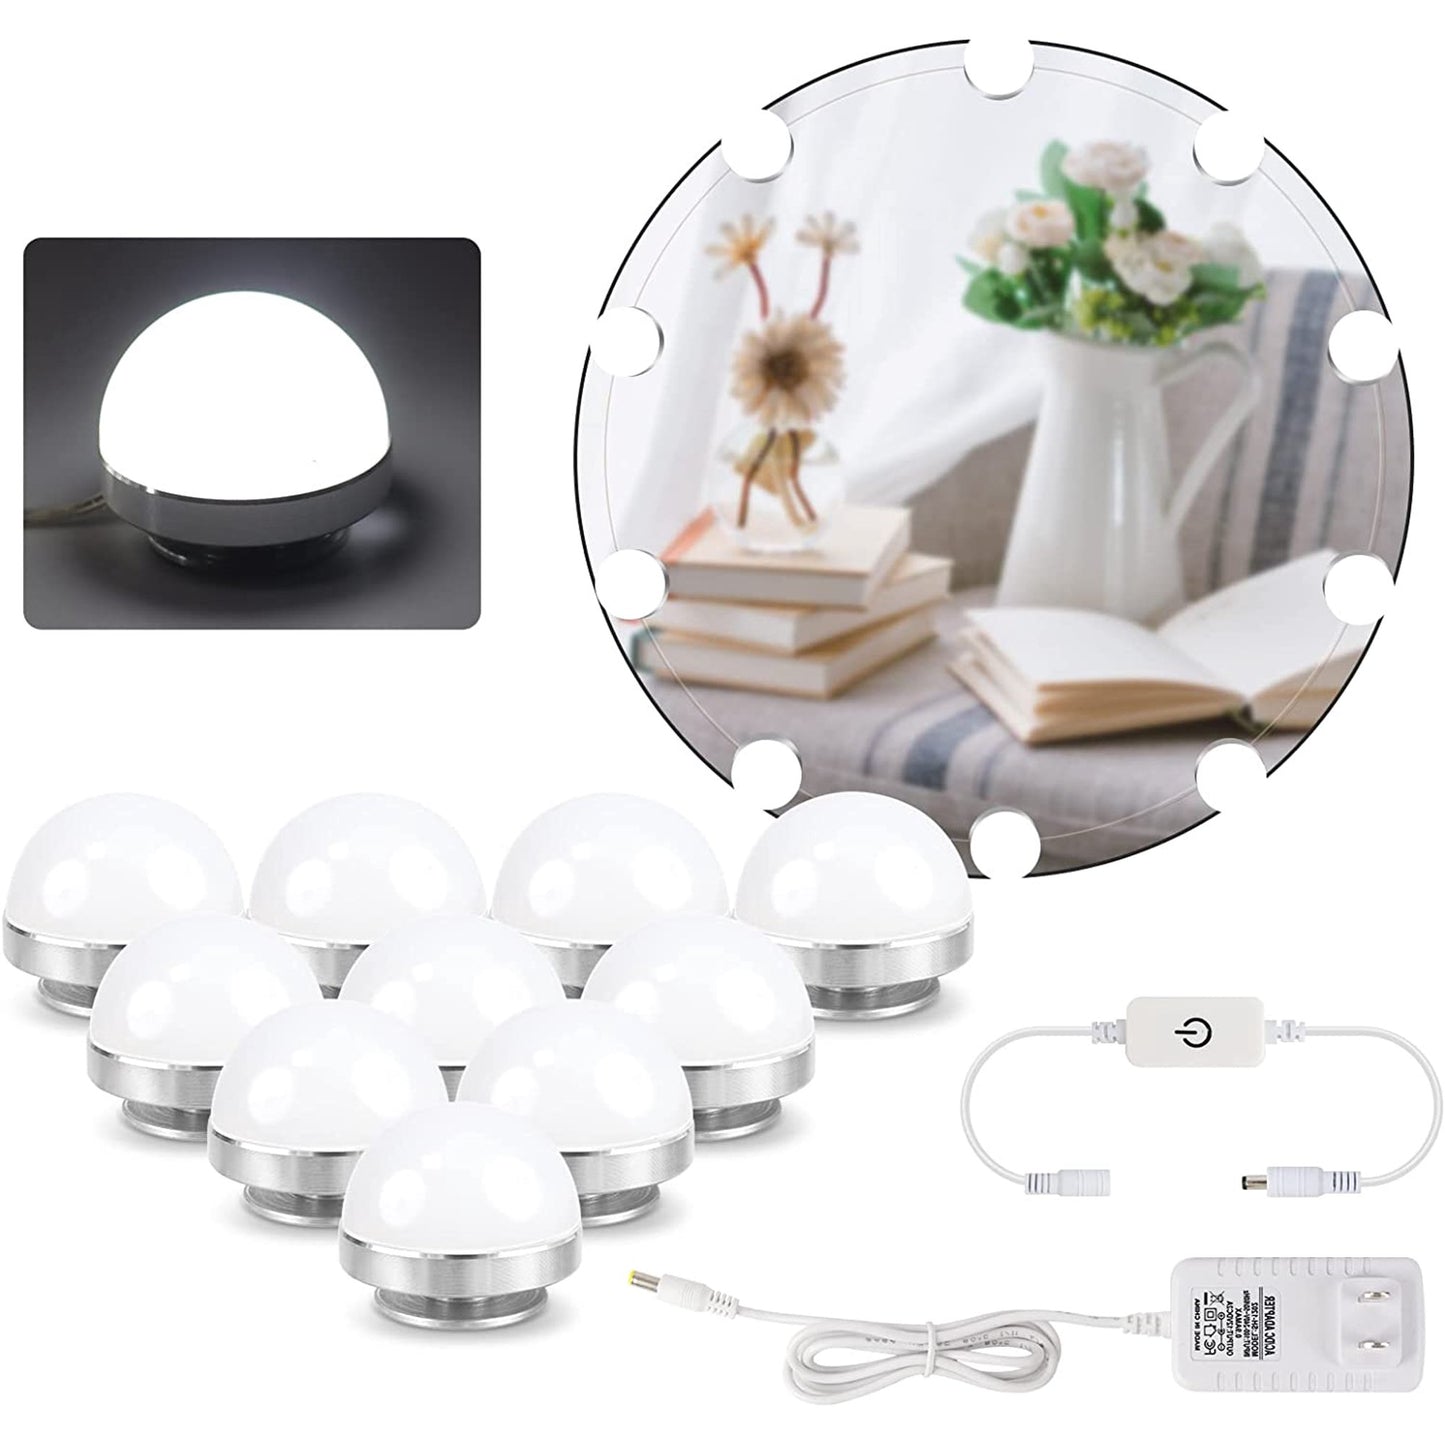 Mirror Lights Kit with 10 Dimmable LED Light Bulbs for Makeup Dressing Table Set,Daylight White